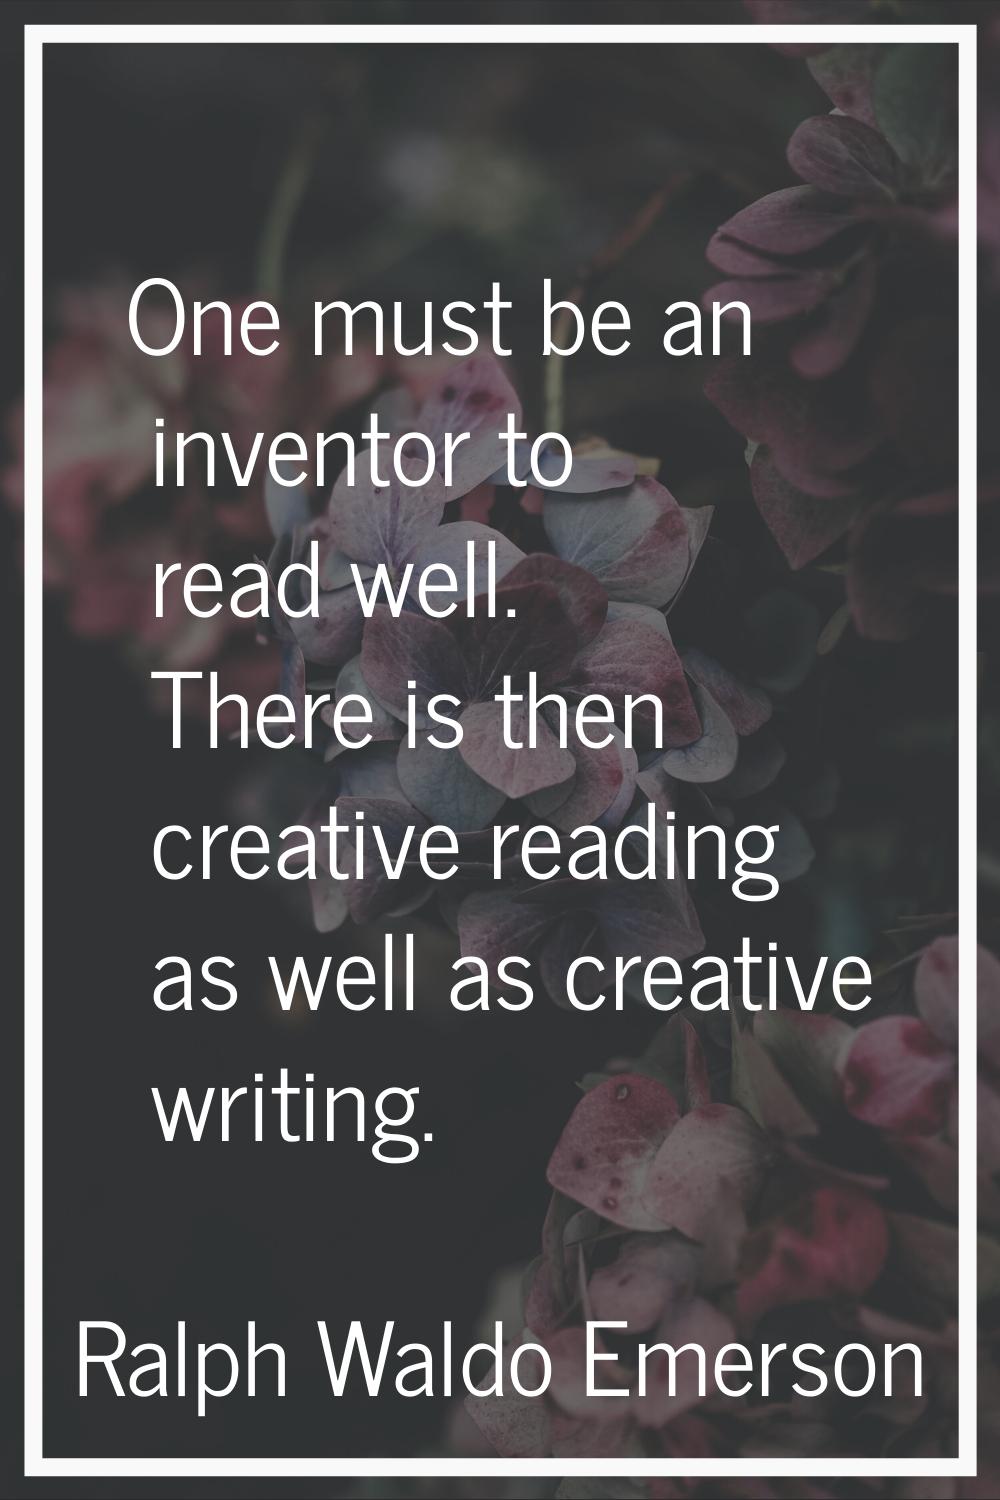 One must be an inventor to read well. There is then creative reading as well as creative writing.